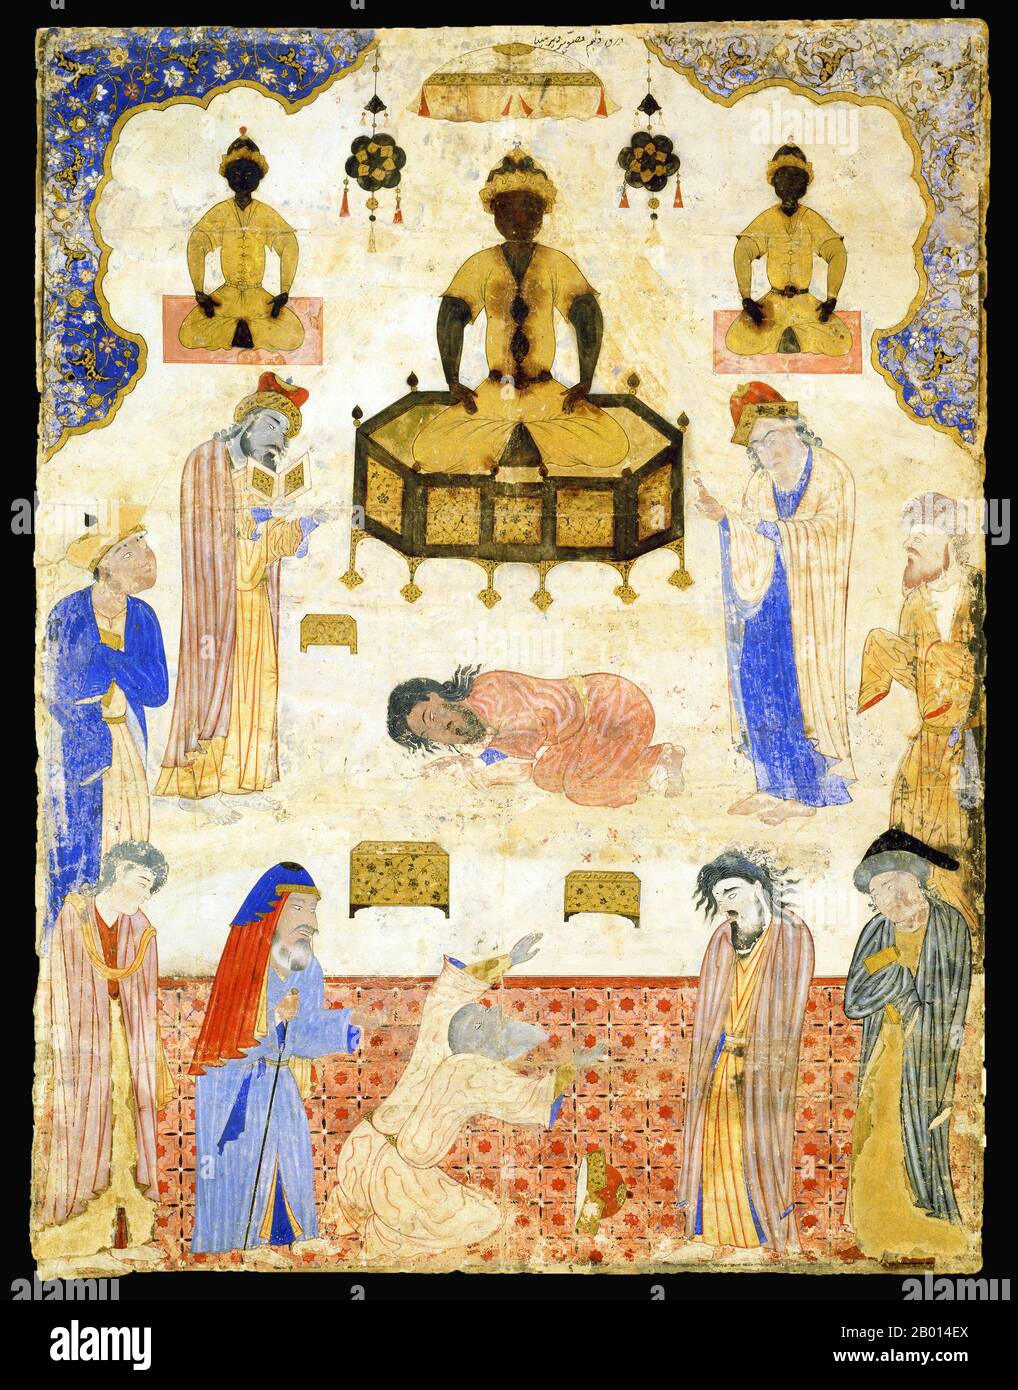 Iran: 'Idol-worshippers before an Idol'. Miniature from Jafar al-Sadiq's Fal-nama, c. 1550.  A Fal-nama is a book of divination that can be consulted at random. Opposite each painting is an explanatory text. This text tells us that the scene is enacted in the 'Azure monastery' - location unknown. The omens associated with the miniature are highly inauspicious. In around 1550, the ruling Shah Tahmasp developed an Islamic aversion to figurative painting, and it is likely that this manuscript was the last to be made in the shah’s studio. Stock Photo